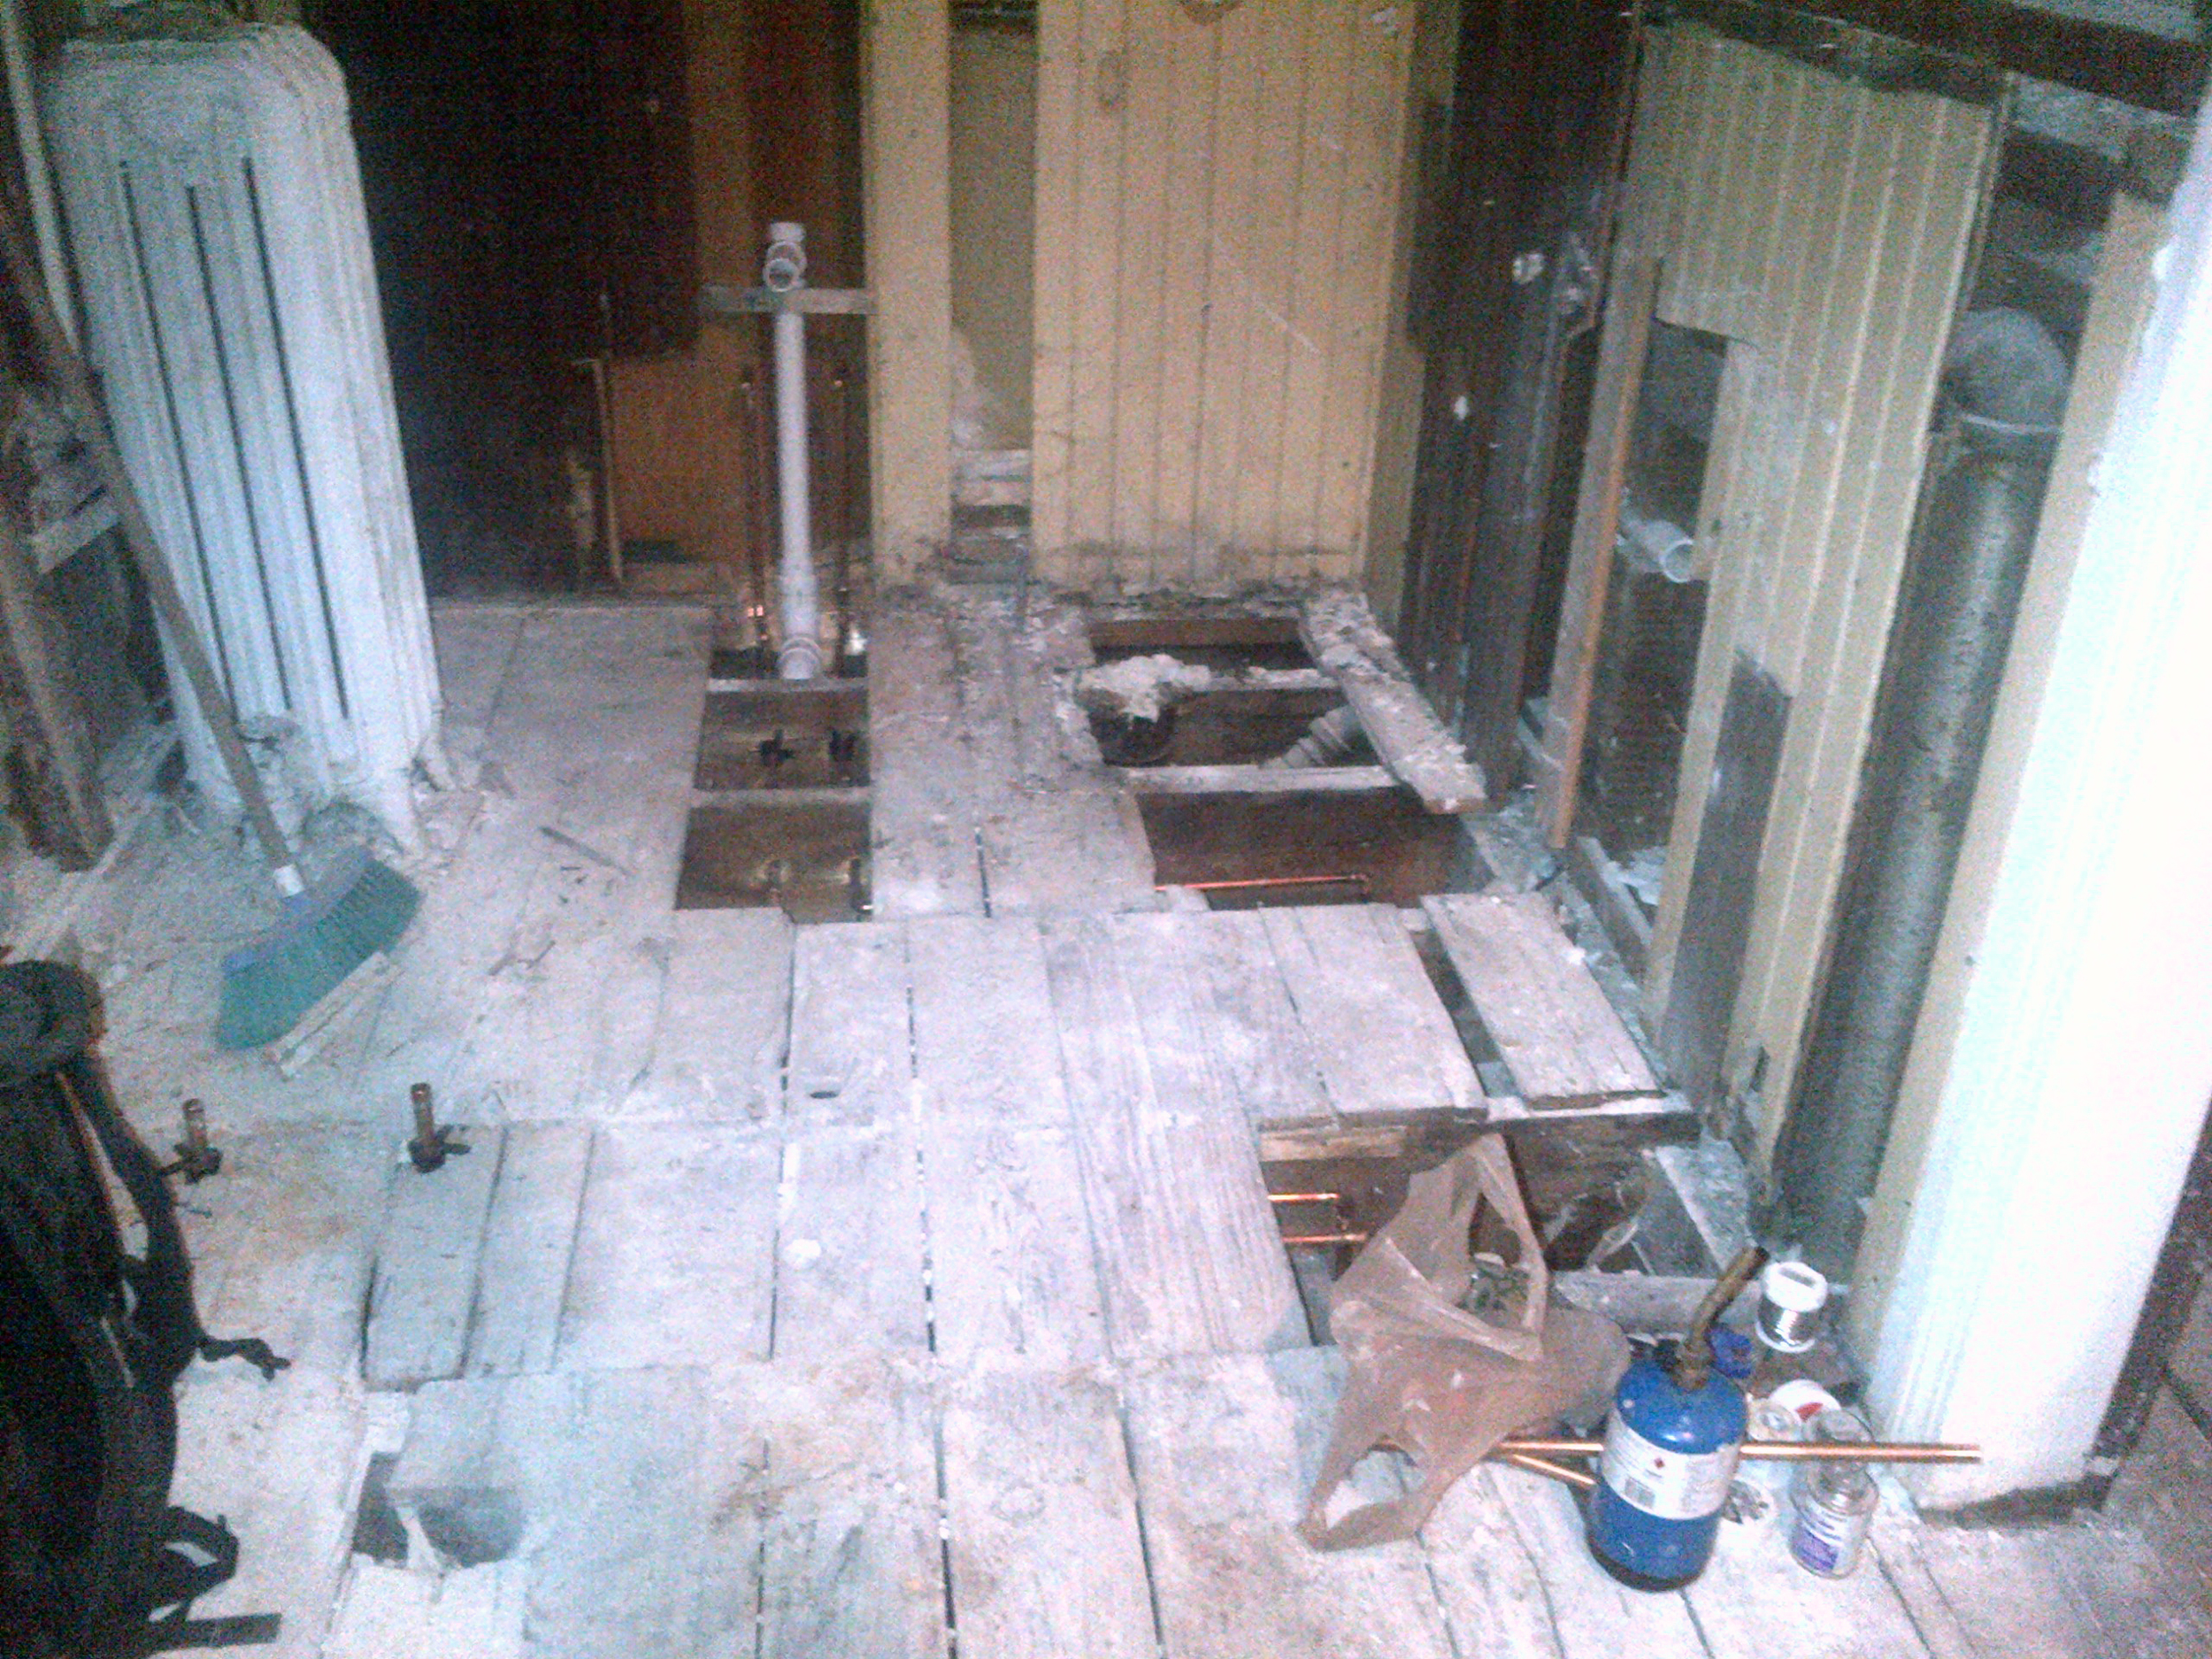 Significant water damage had been done to the bathroom floor.